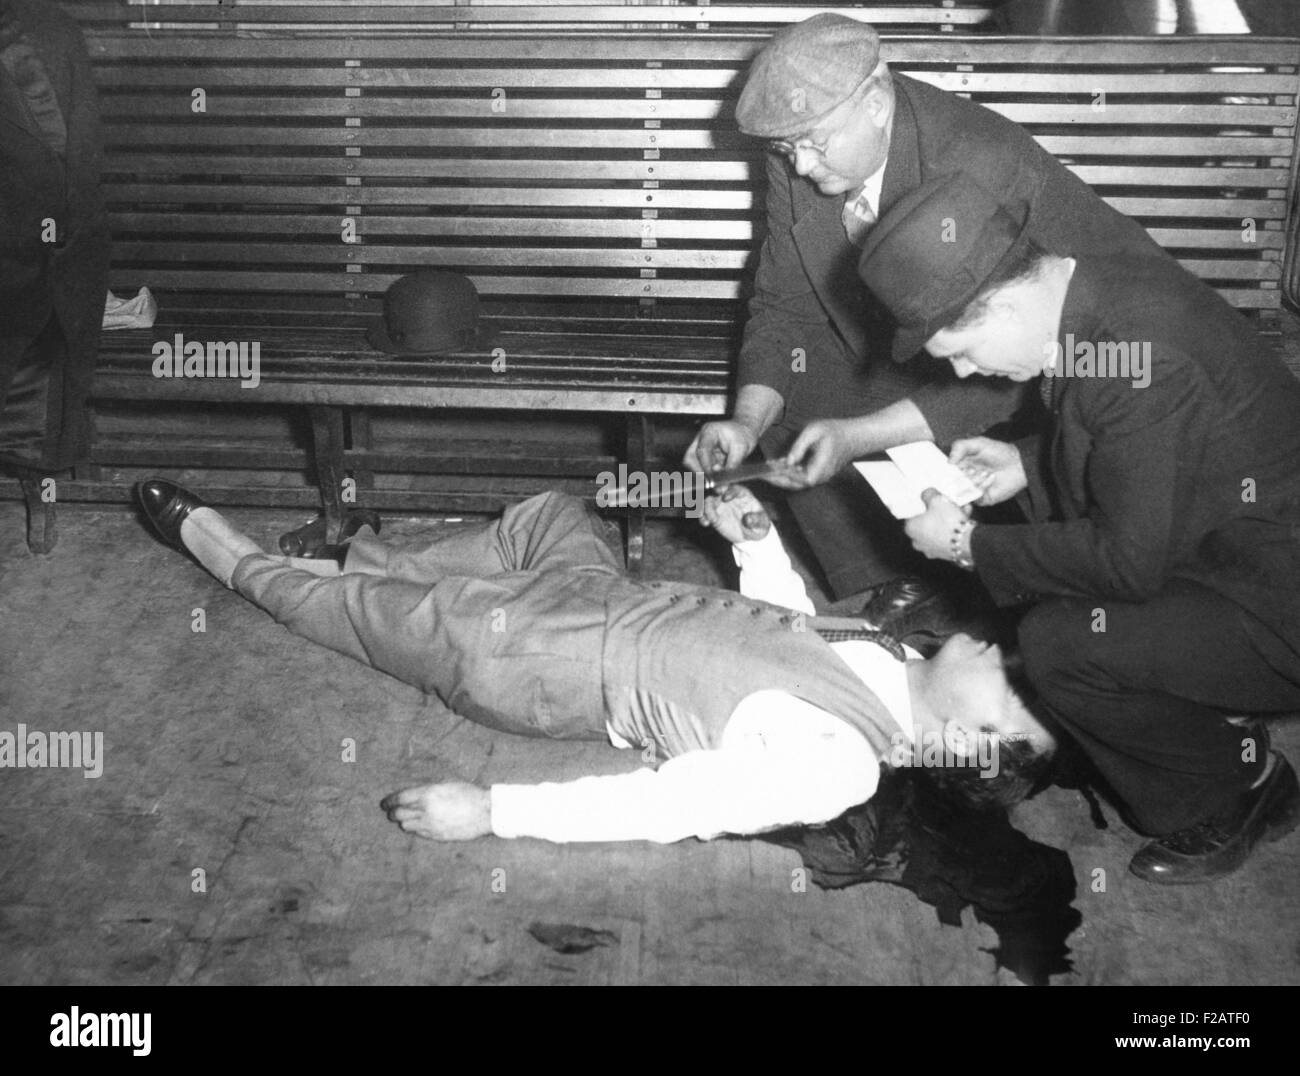 Gangster Jack McGurn lying dead in a Chicago bowling alley, Feb. 15, 1936. He was killed by three gunmen on the seventh anniversary of the St. Valentine's Day Massacre. The killers tossed a Valentine card near his body. He had been indicted for the massacre, but was never brought to trial. McGurn was played by Clint Ritchie in the 1967 film ST. VALENTINE'S DAY MASSACRE and by Carmen Argenziano in 1975 in CAPONE. (CSU 2015 11 1668) Stock Photo